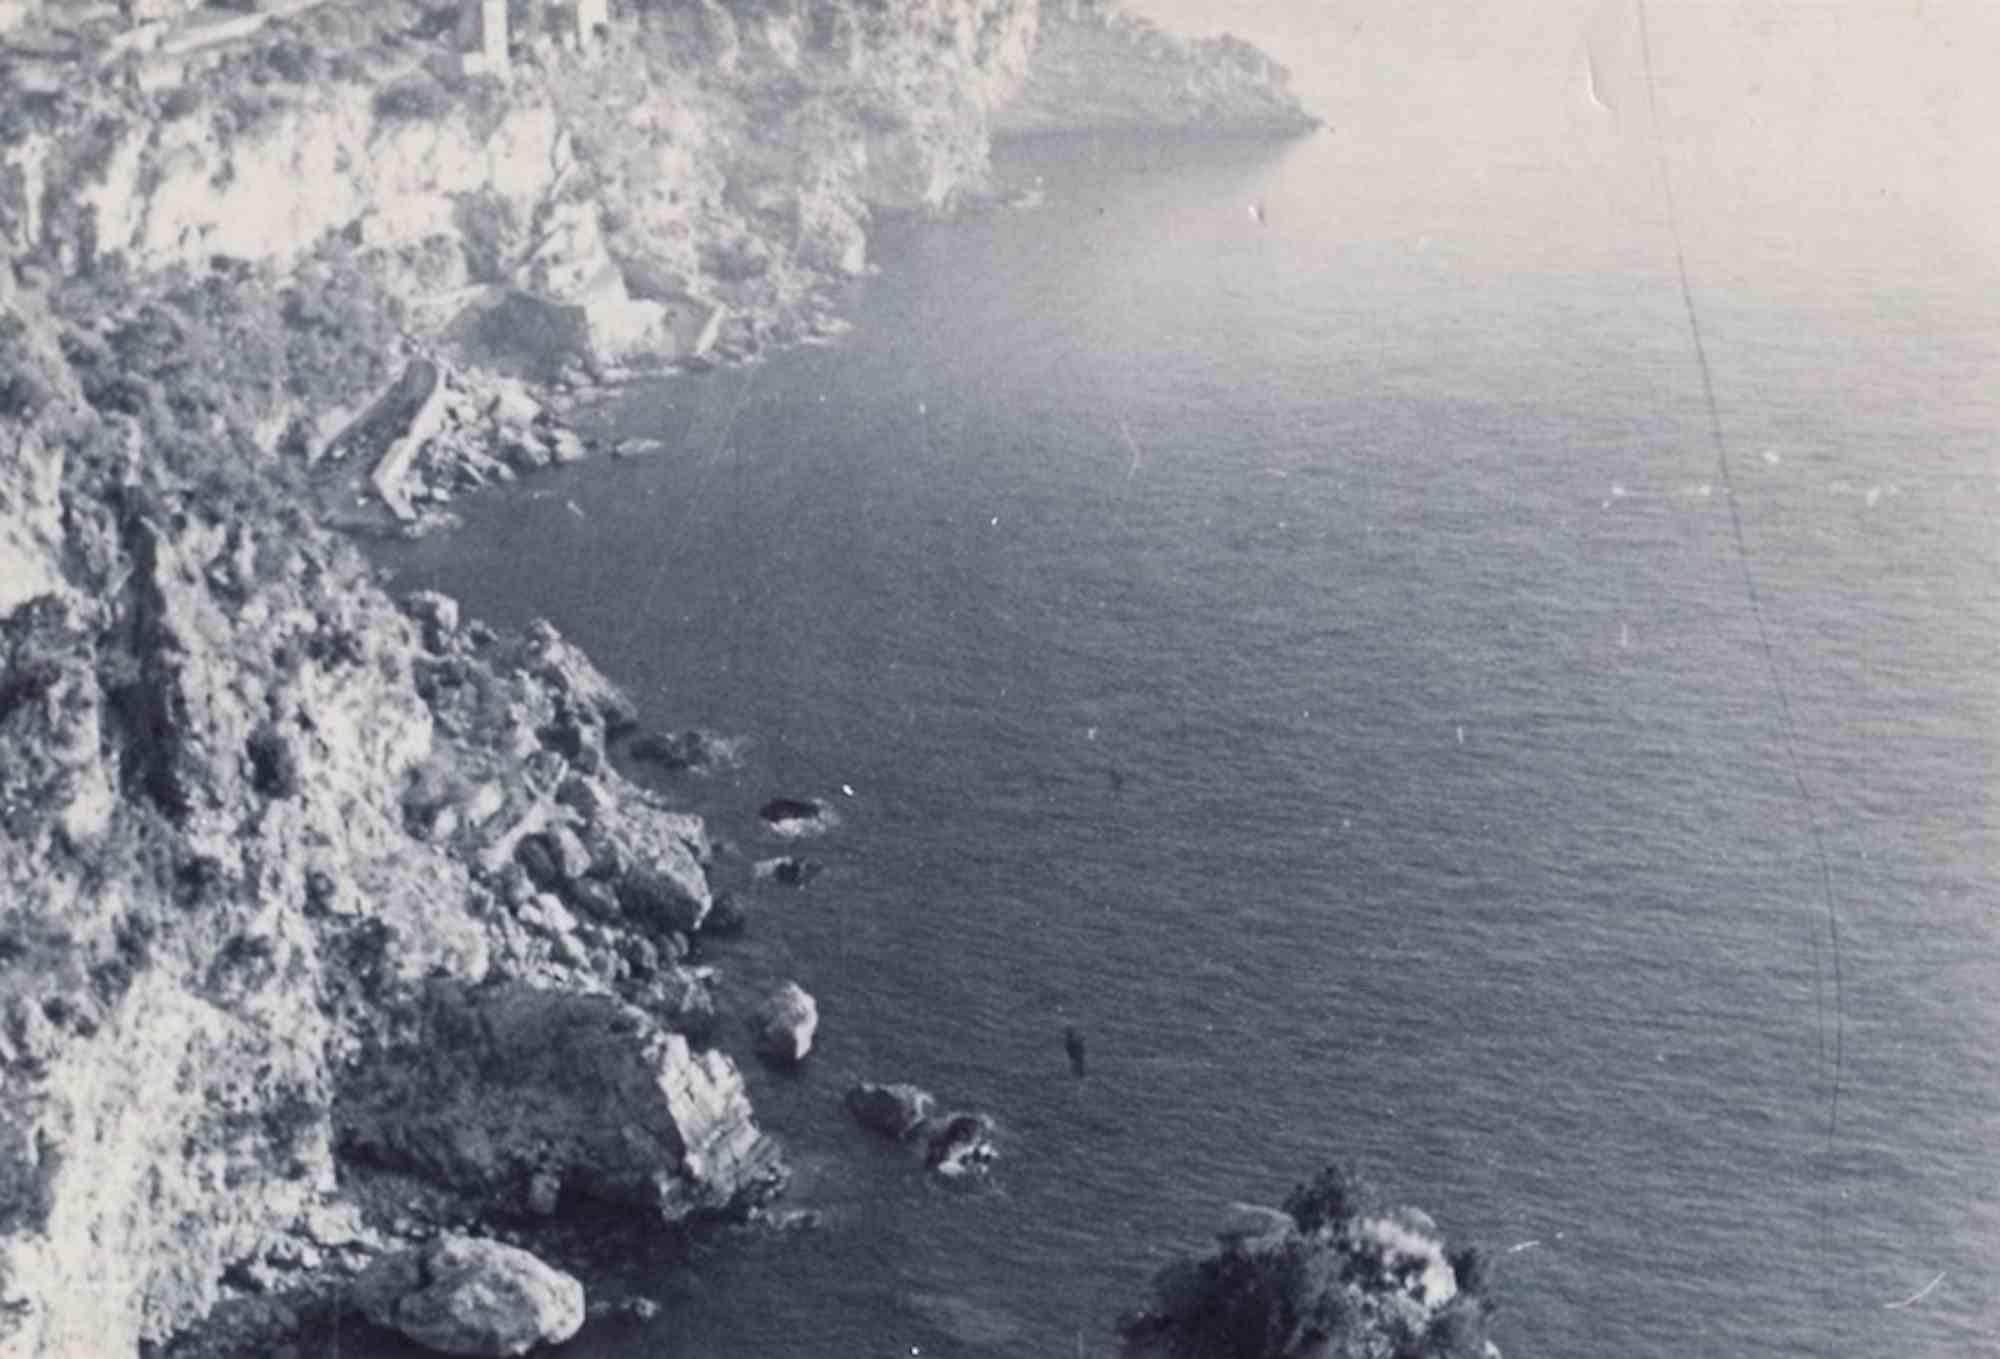 Unknown Figurative Photograph - Old days Photo -Seascape - Vintage Photo - Early 20th Century